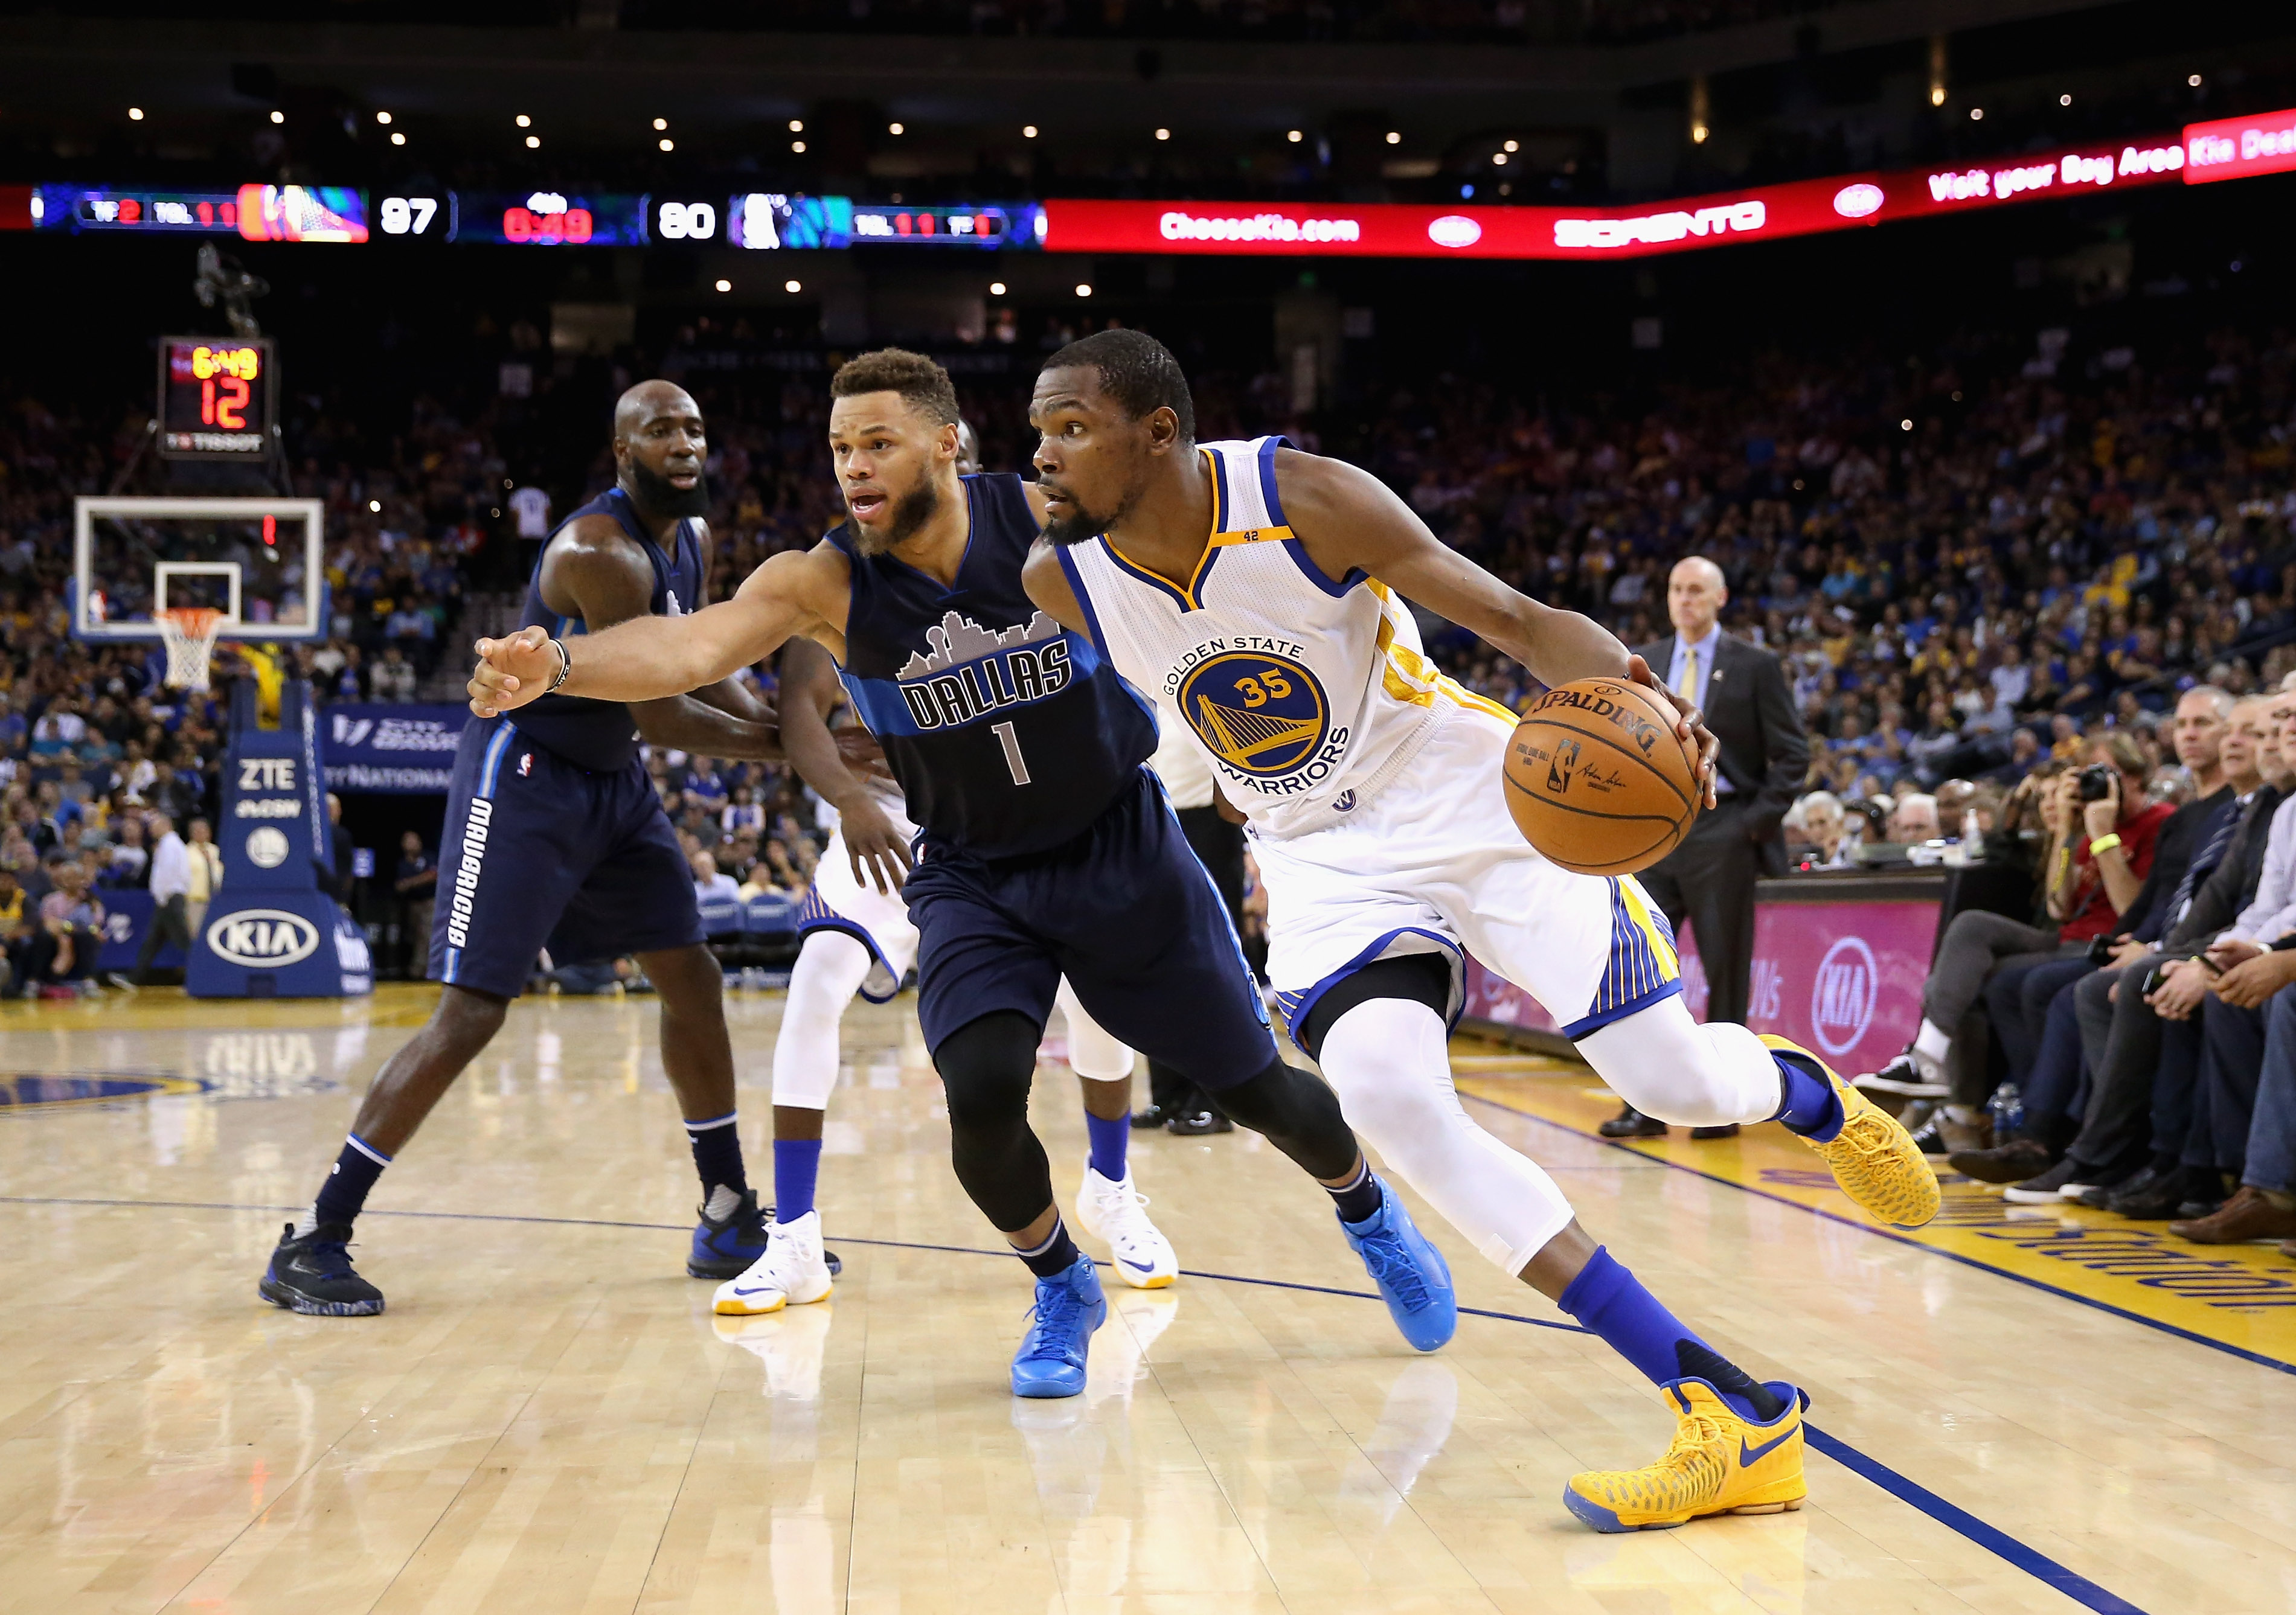 Suns vs. Warriors Live Stream How to Watch Online